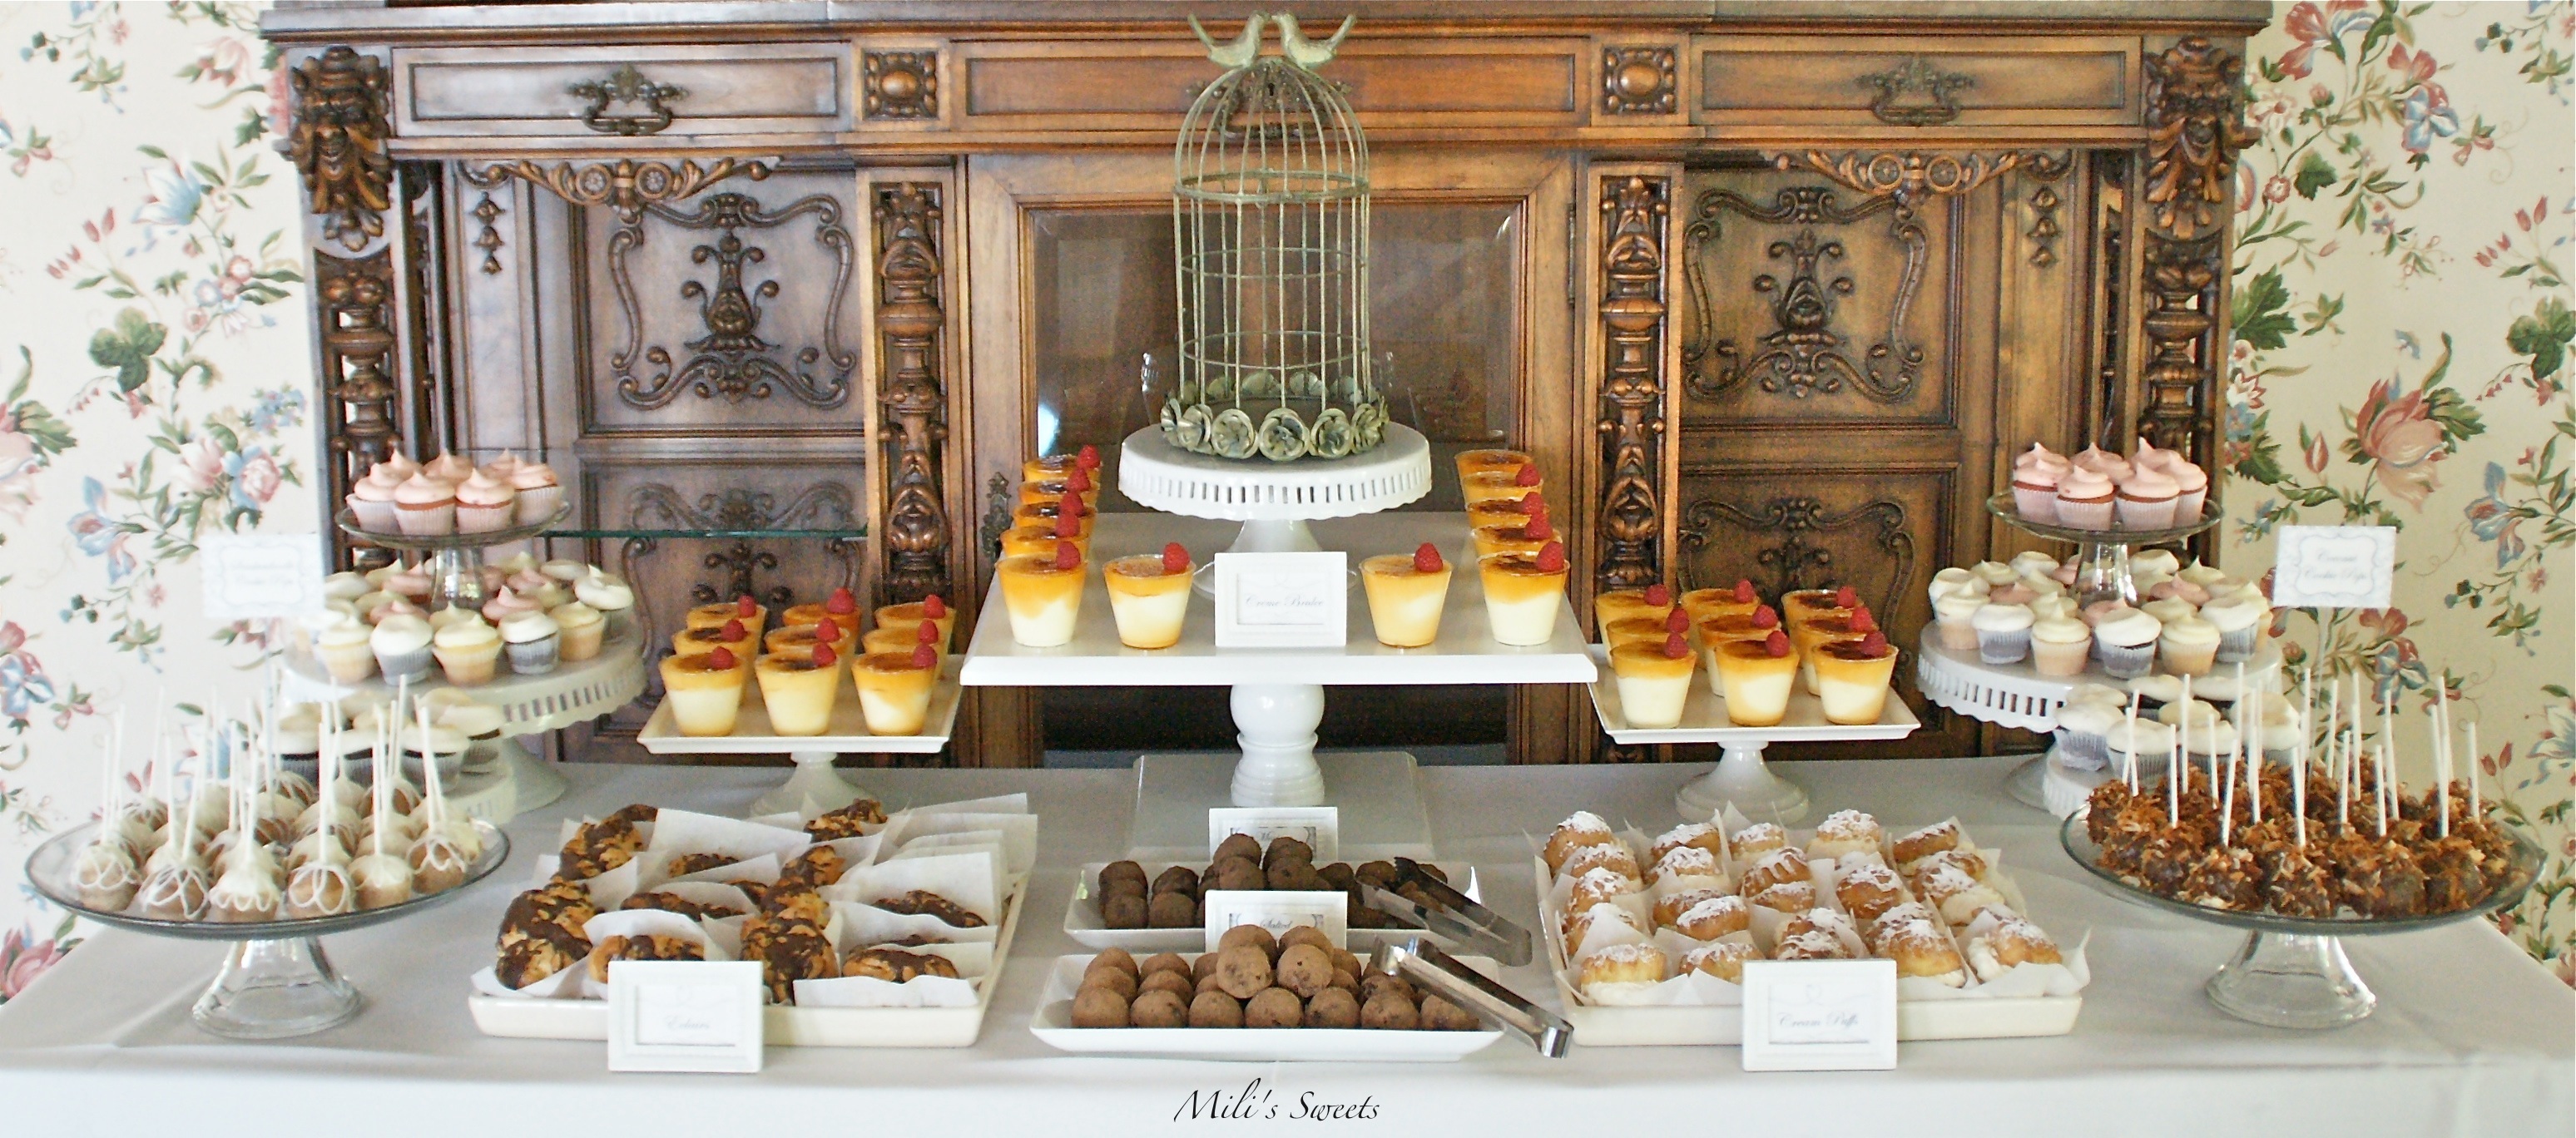 image from Mili's Sweets dessert table